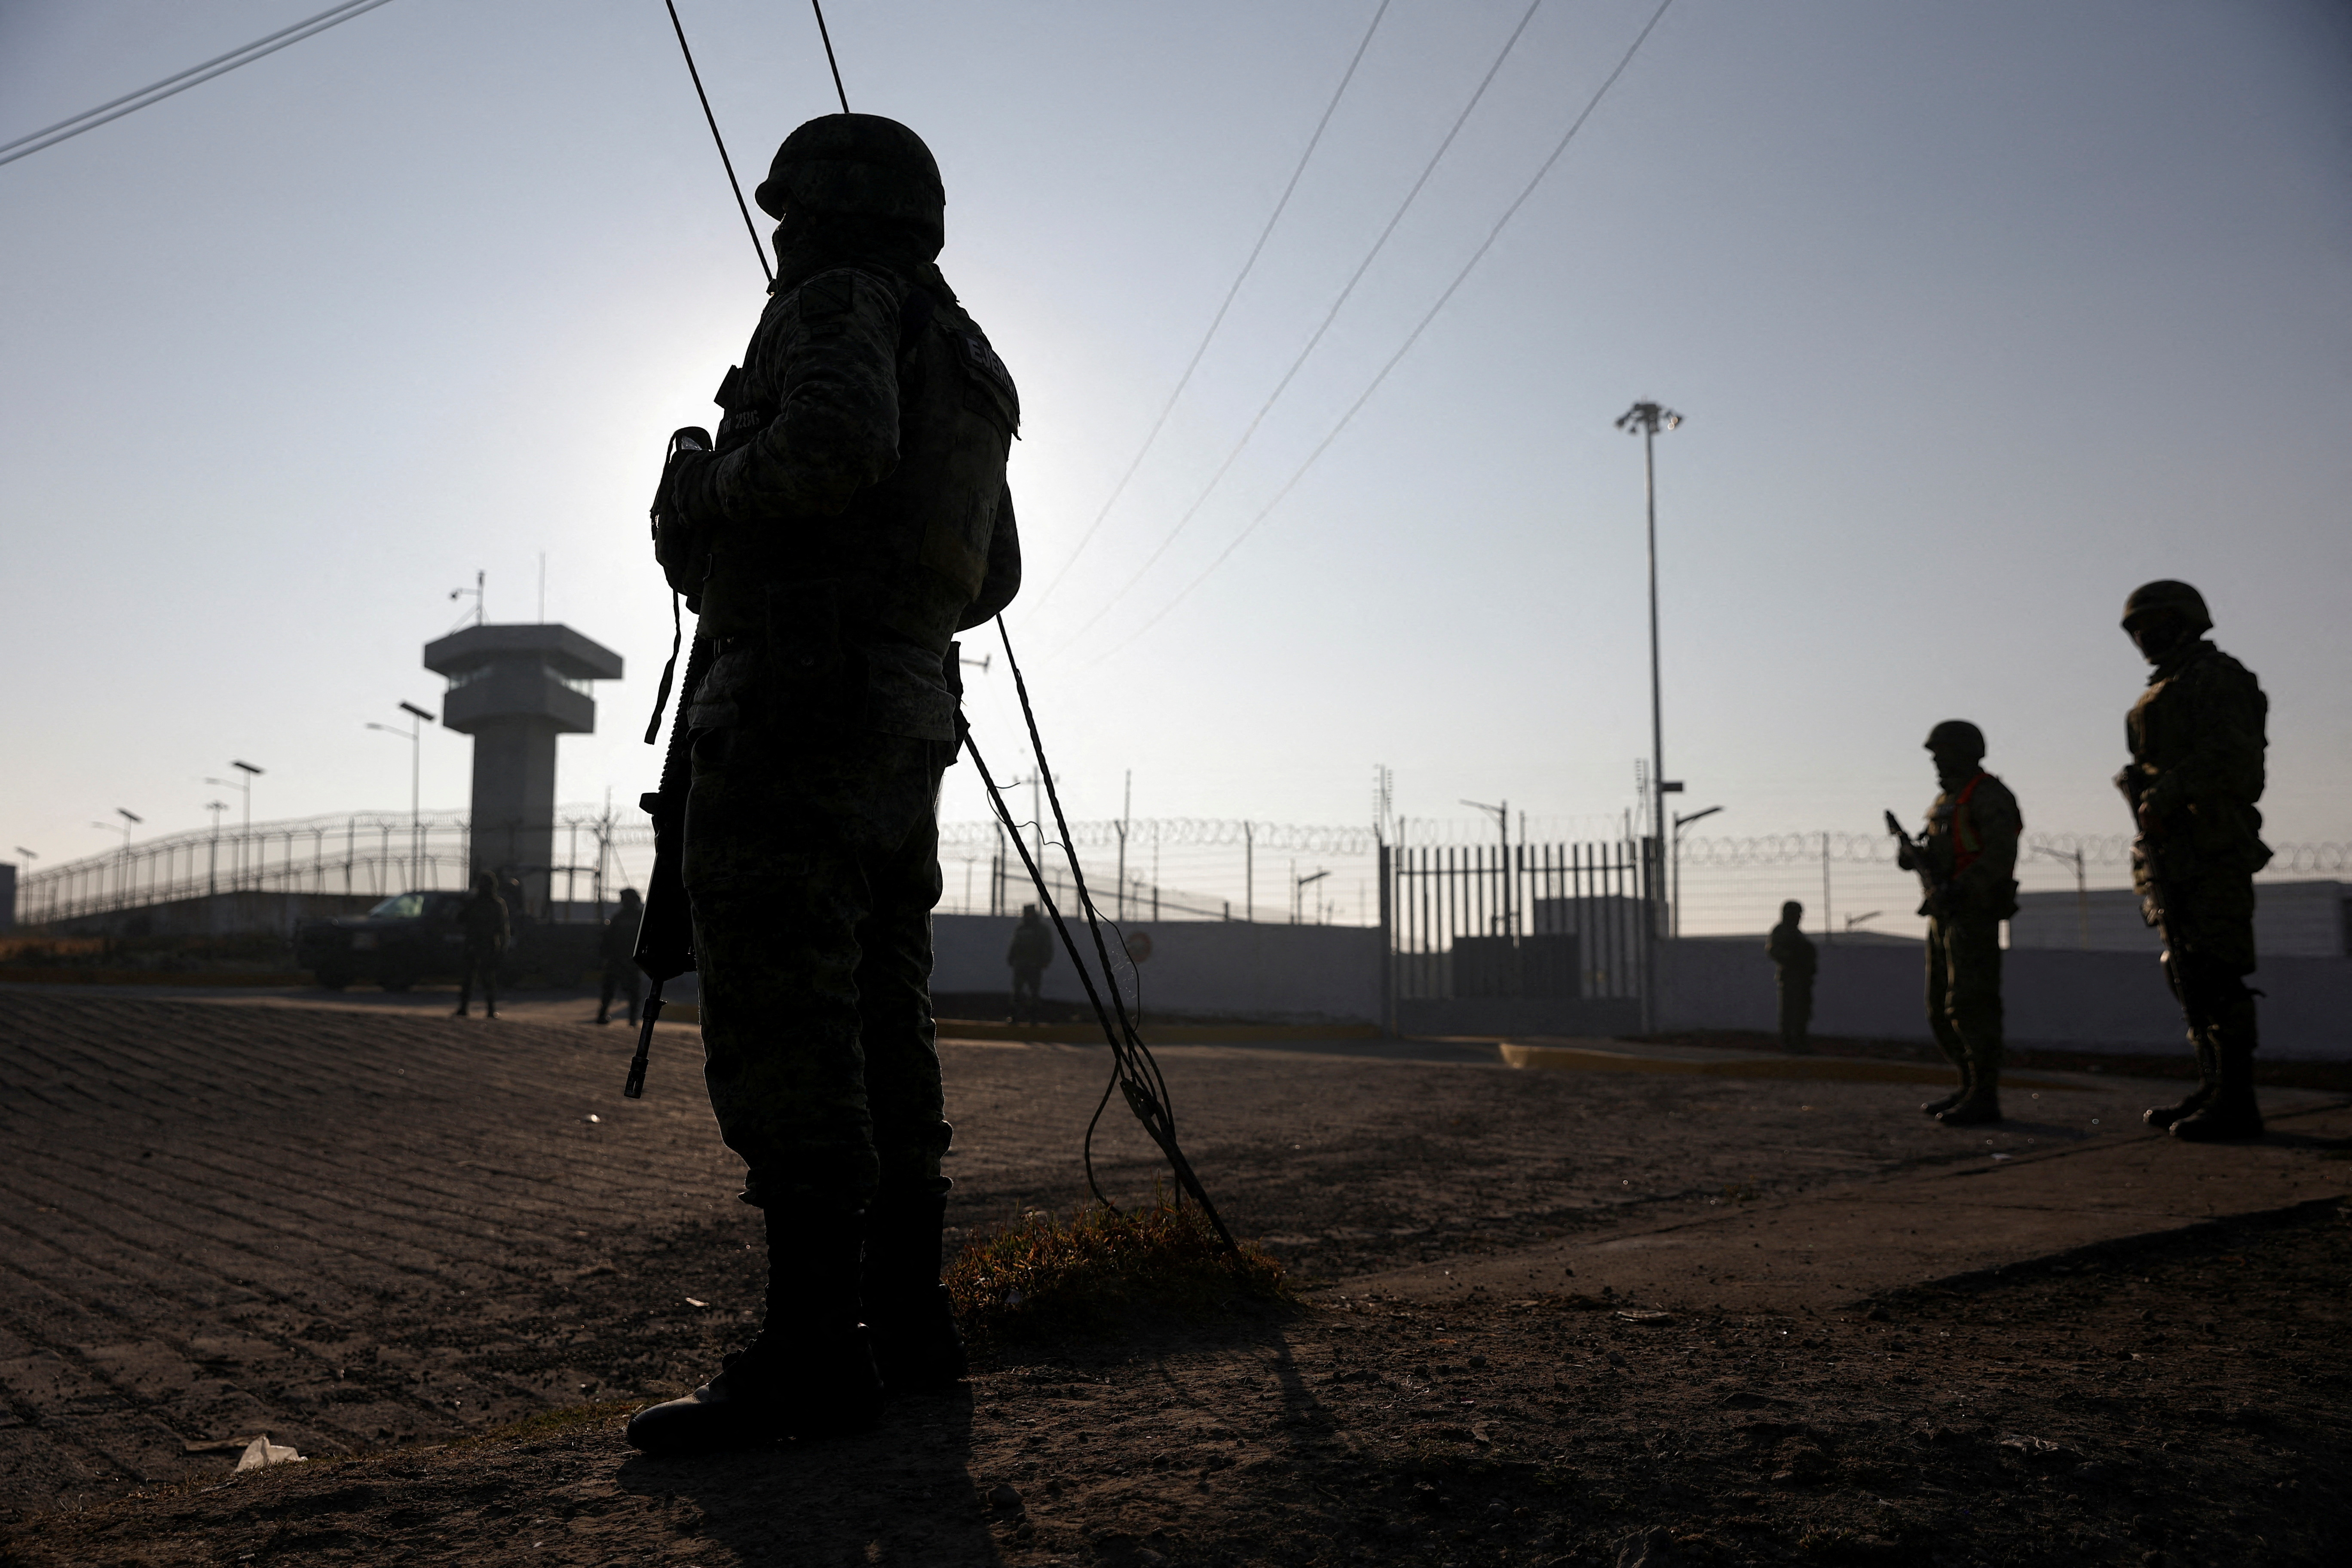 Security forces stand outside of high security prison where Mexican drug leader Ovidio Guzman is imprisoned, in Almoloya de Juarez